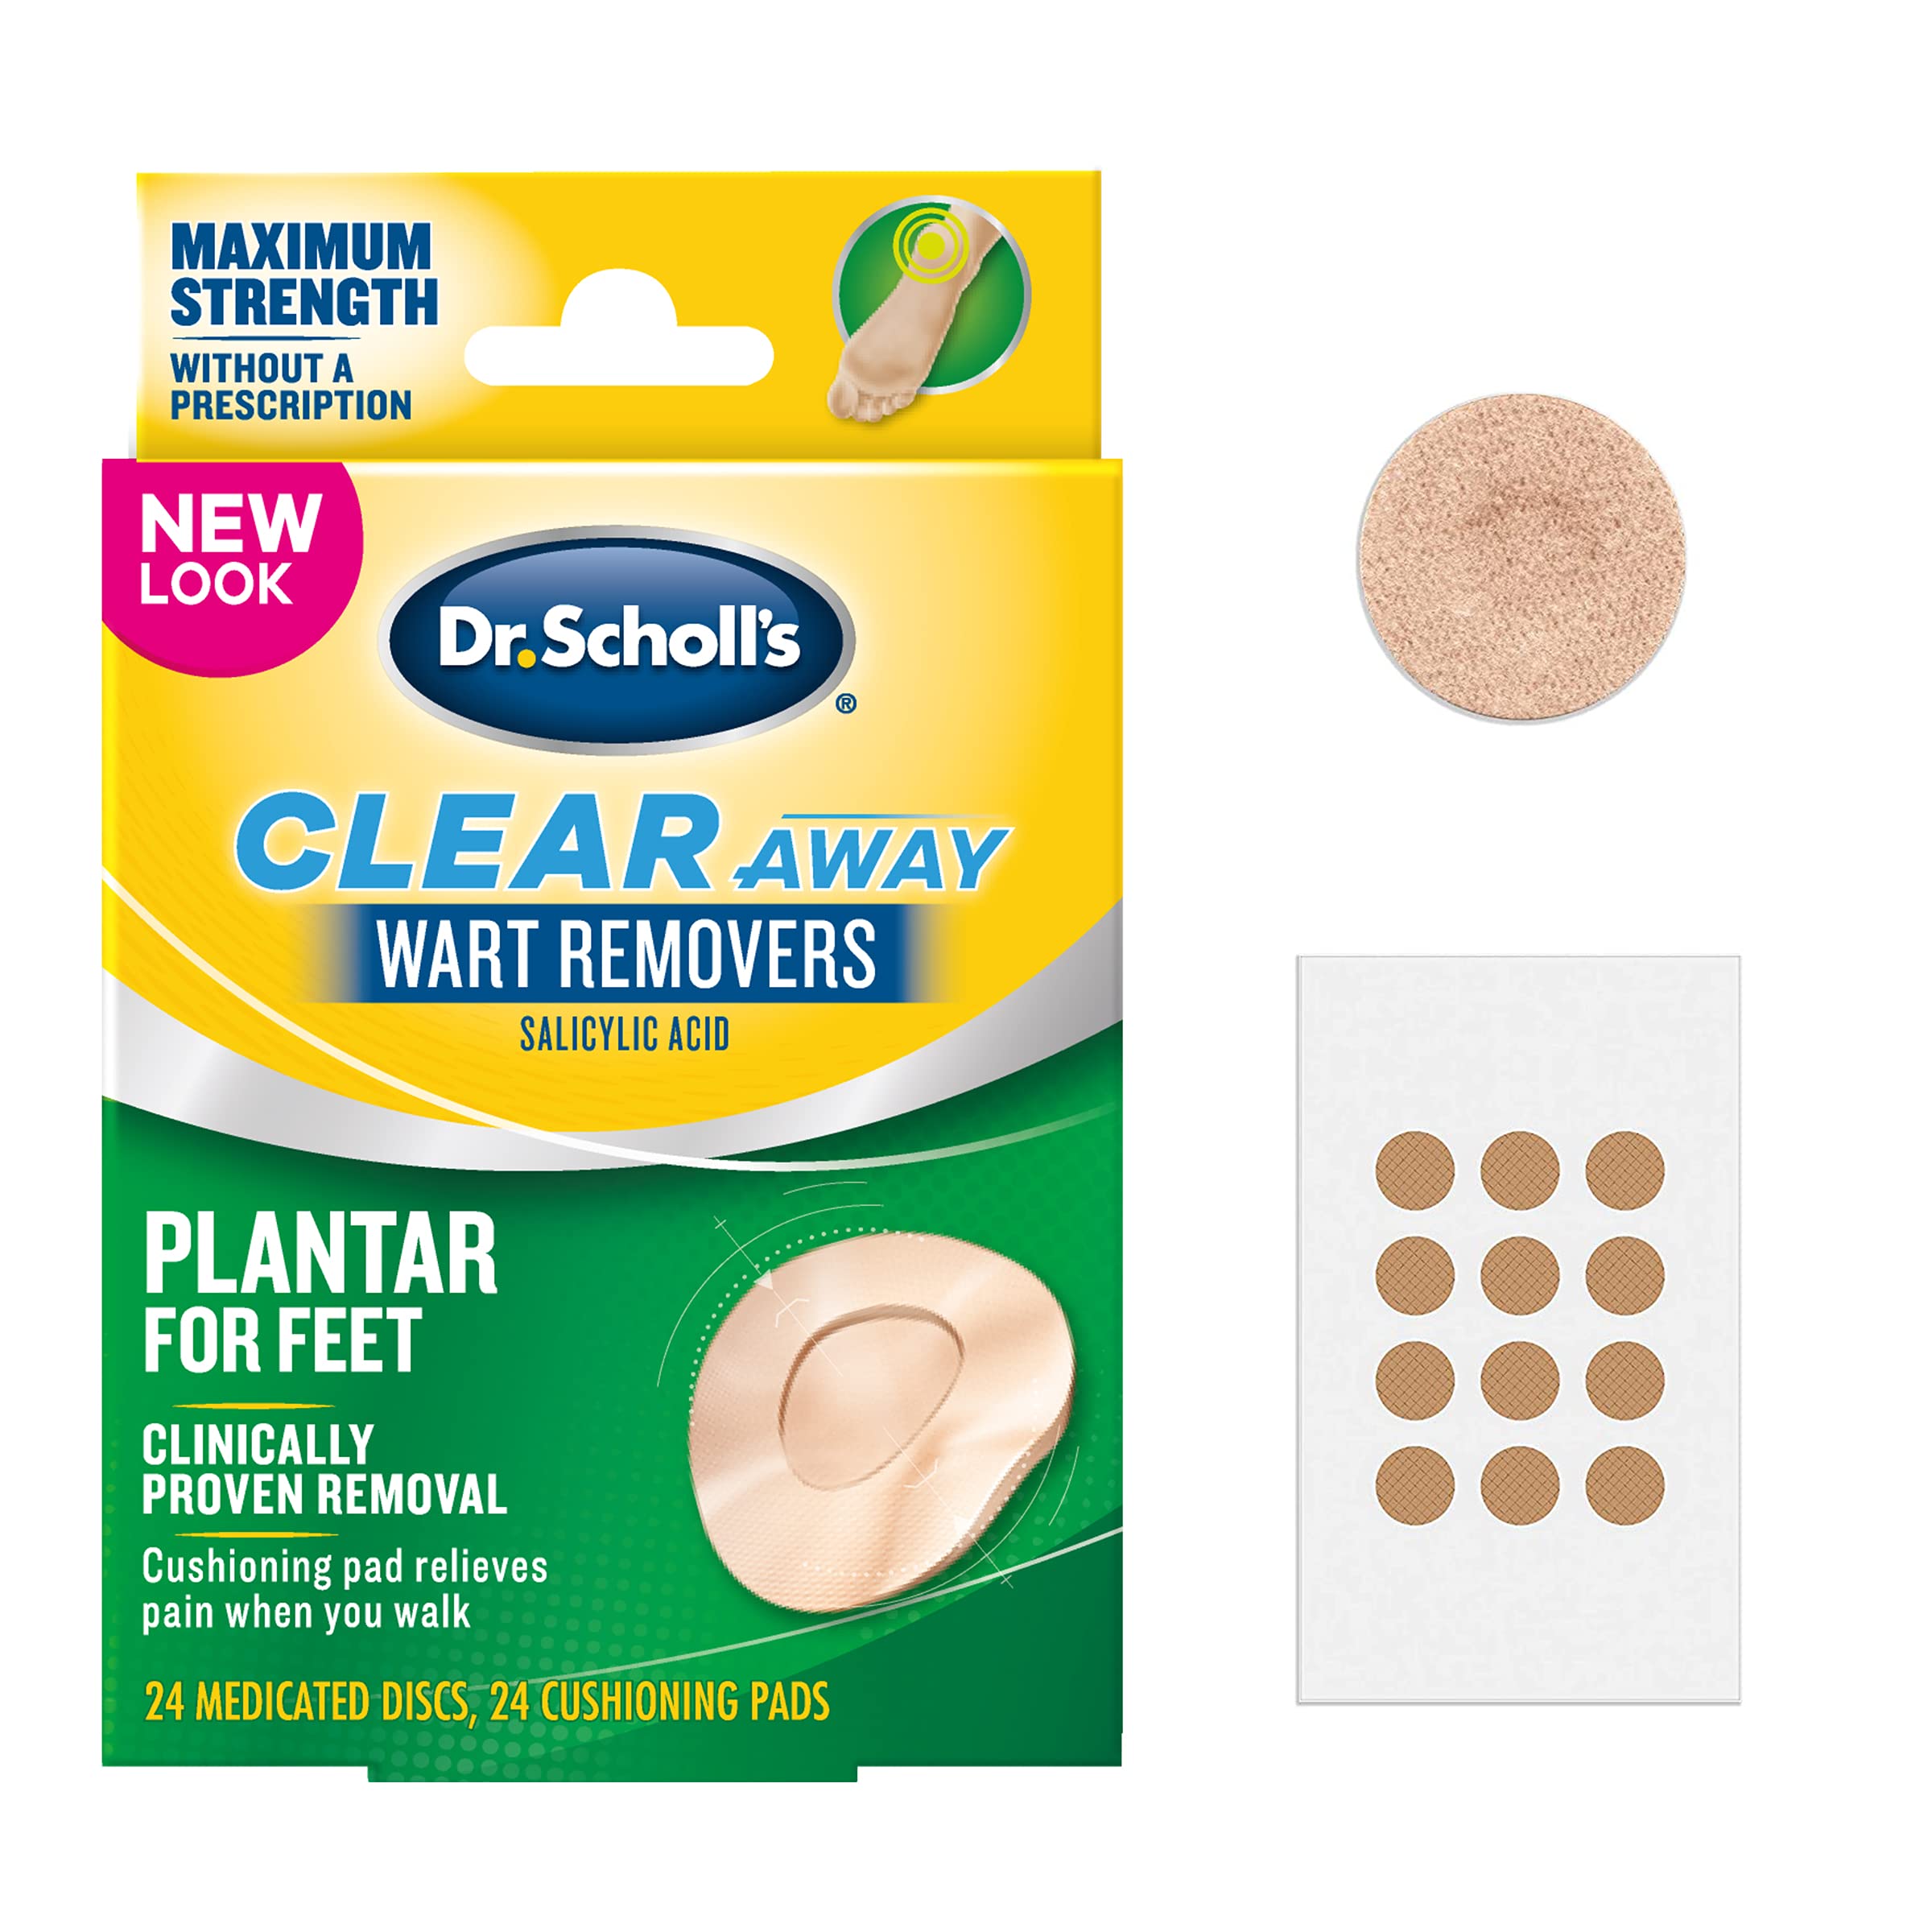 Dr. Scholl\'s Dr SchollAs clear Away Plantar Wart Remover for Feet, 24 Medicated Discs & 24 cushioning Pads Maximum Strength Without A Prescri